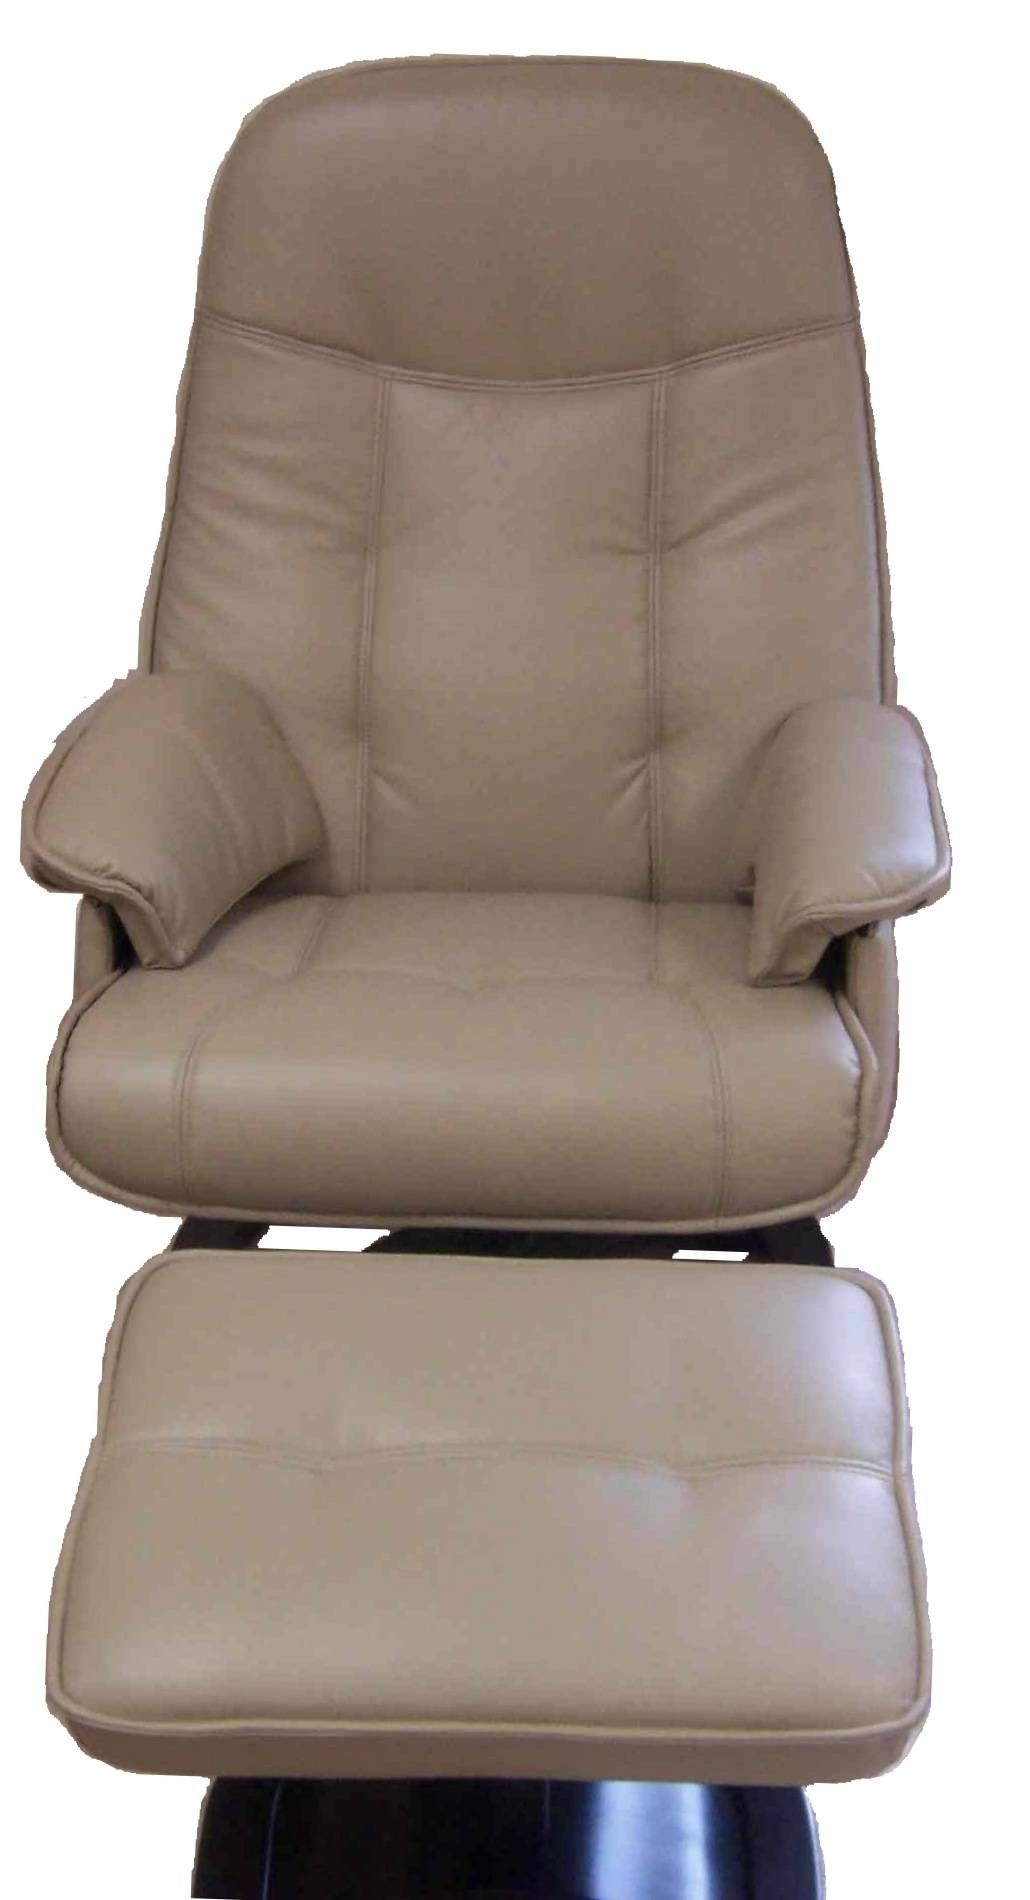 Rv Recliner Sofa 84 With Rv Recliner Sofa | Chinaklsk Within Rv Recliner Sofas (View 13 of 15)